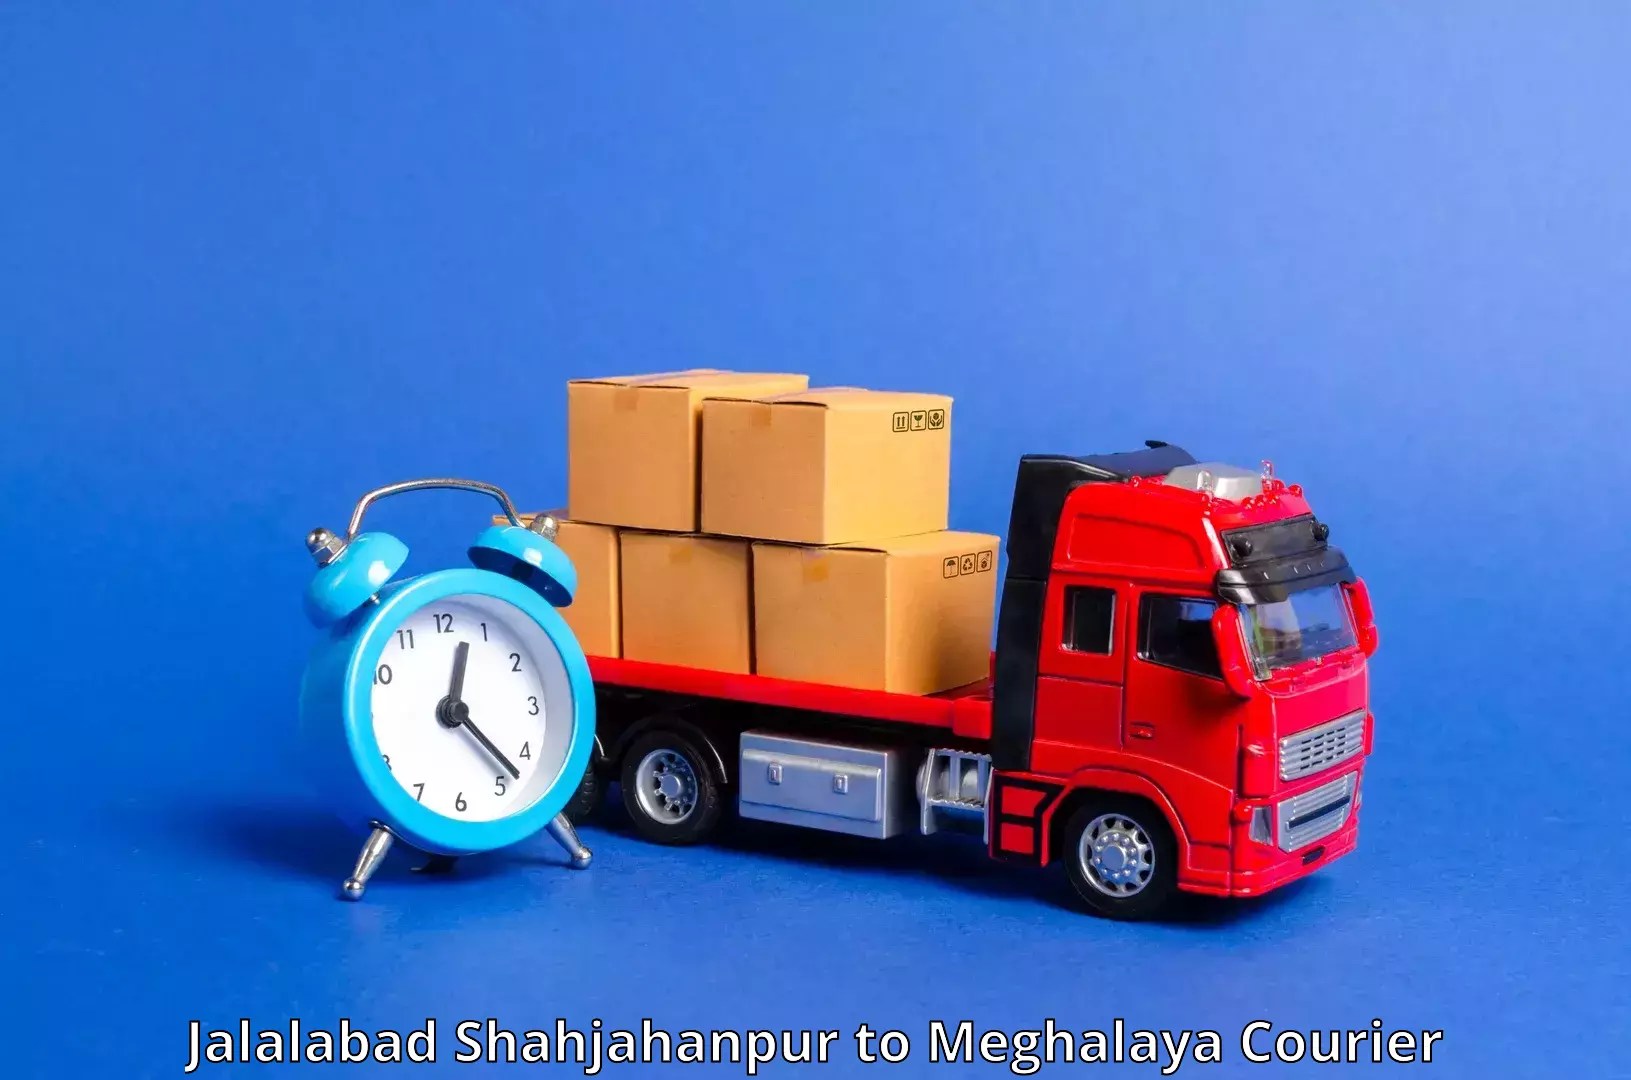 Reliable package handling Jalalabad Shahjahanpur to Dkhiah West